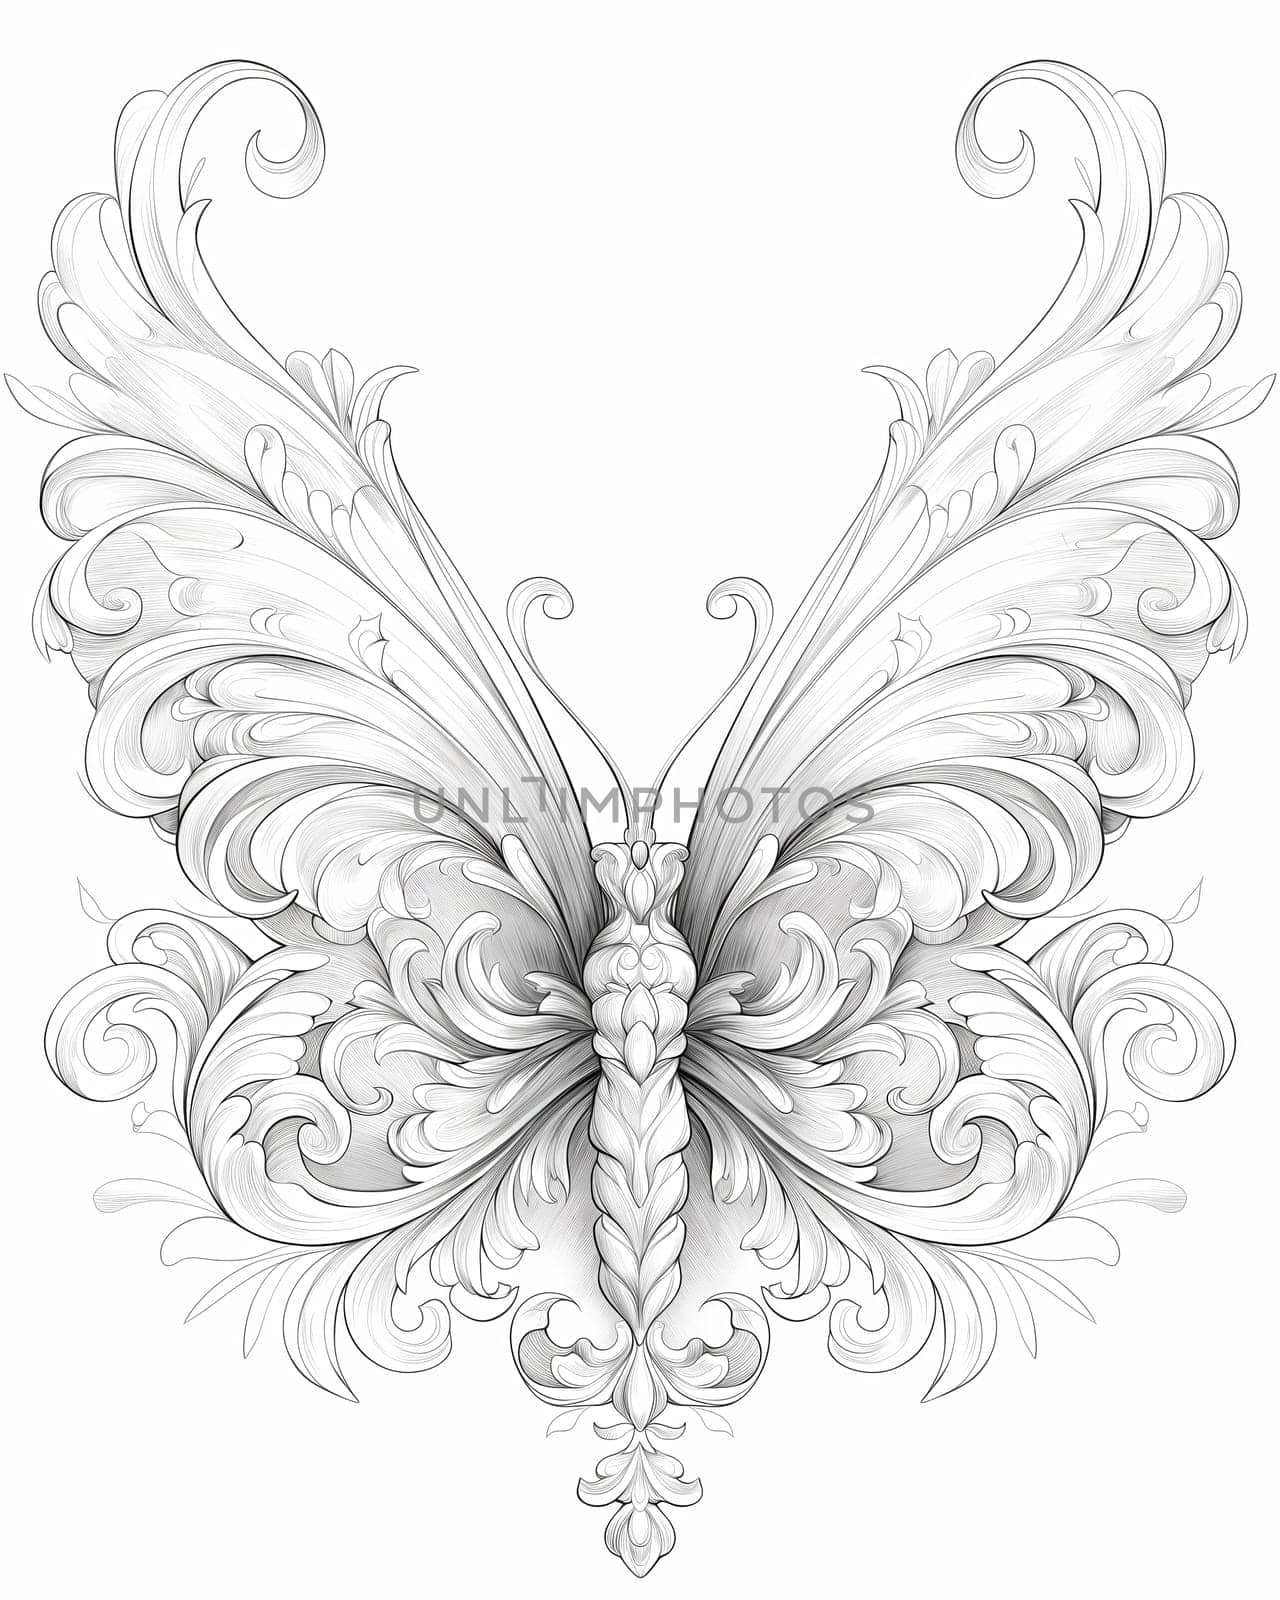 Coloring book for children, butterfly coloring. by Fischeron